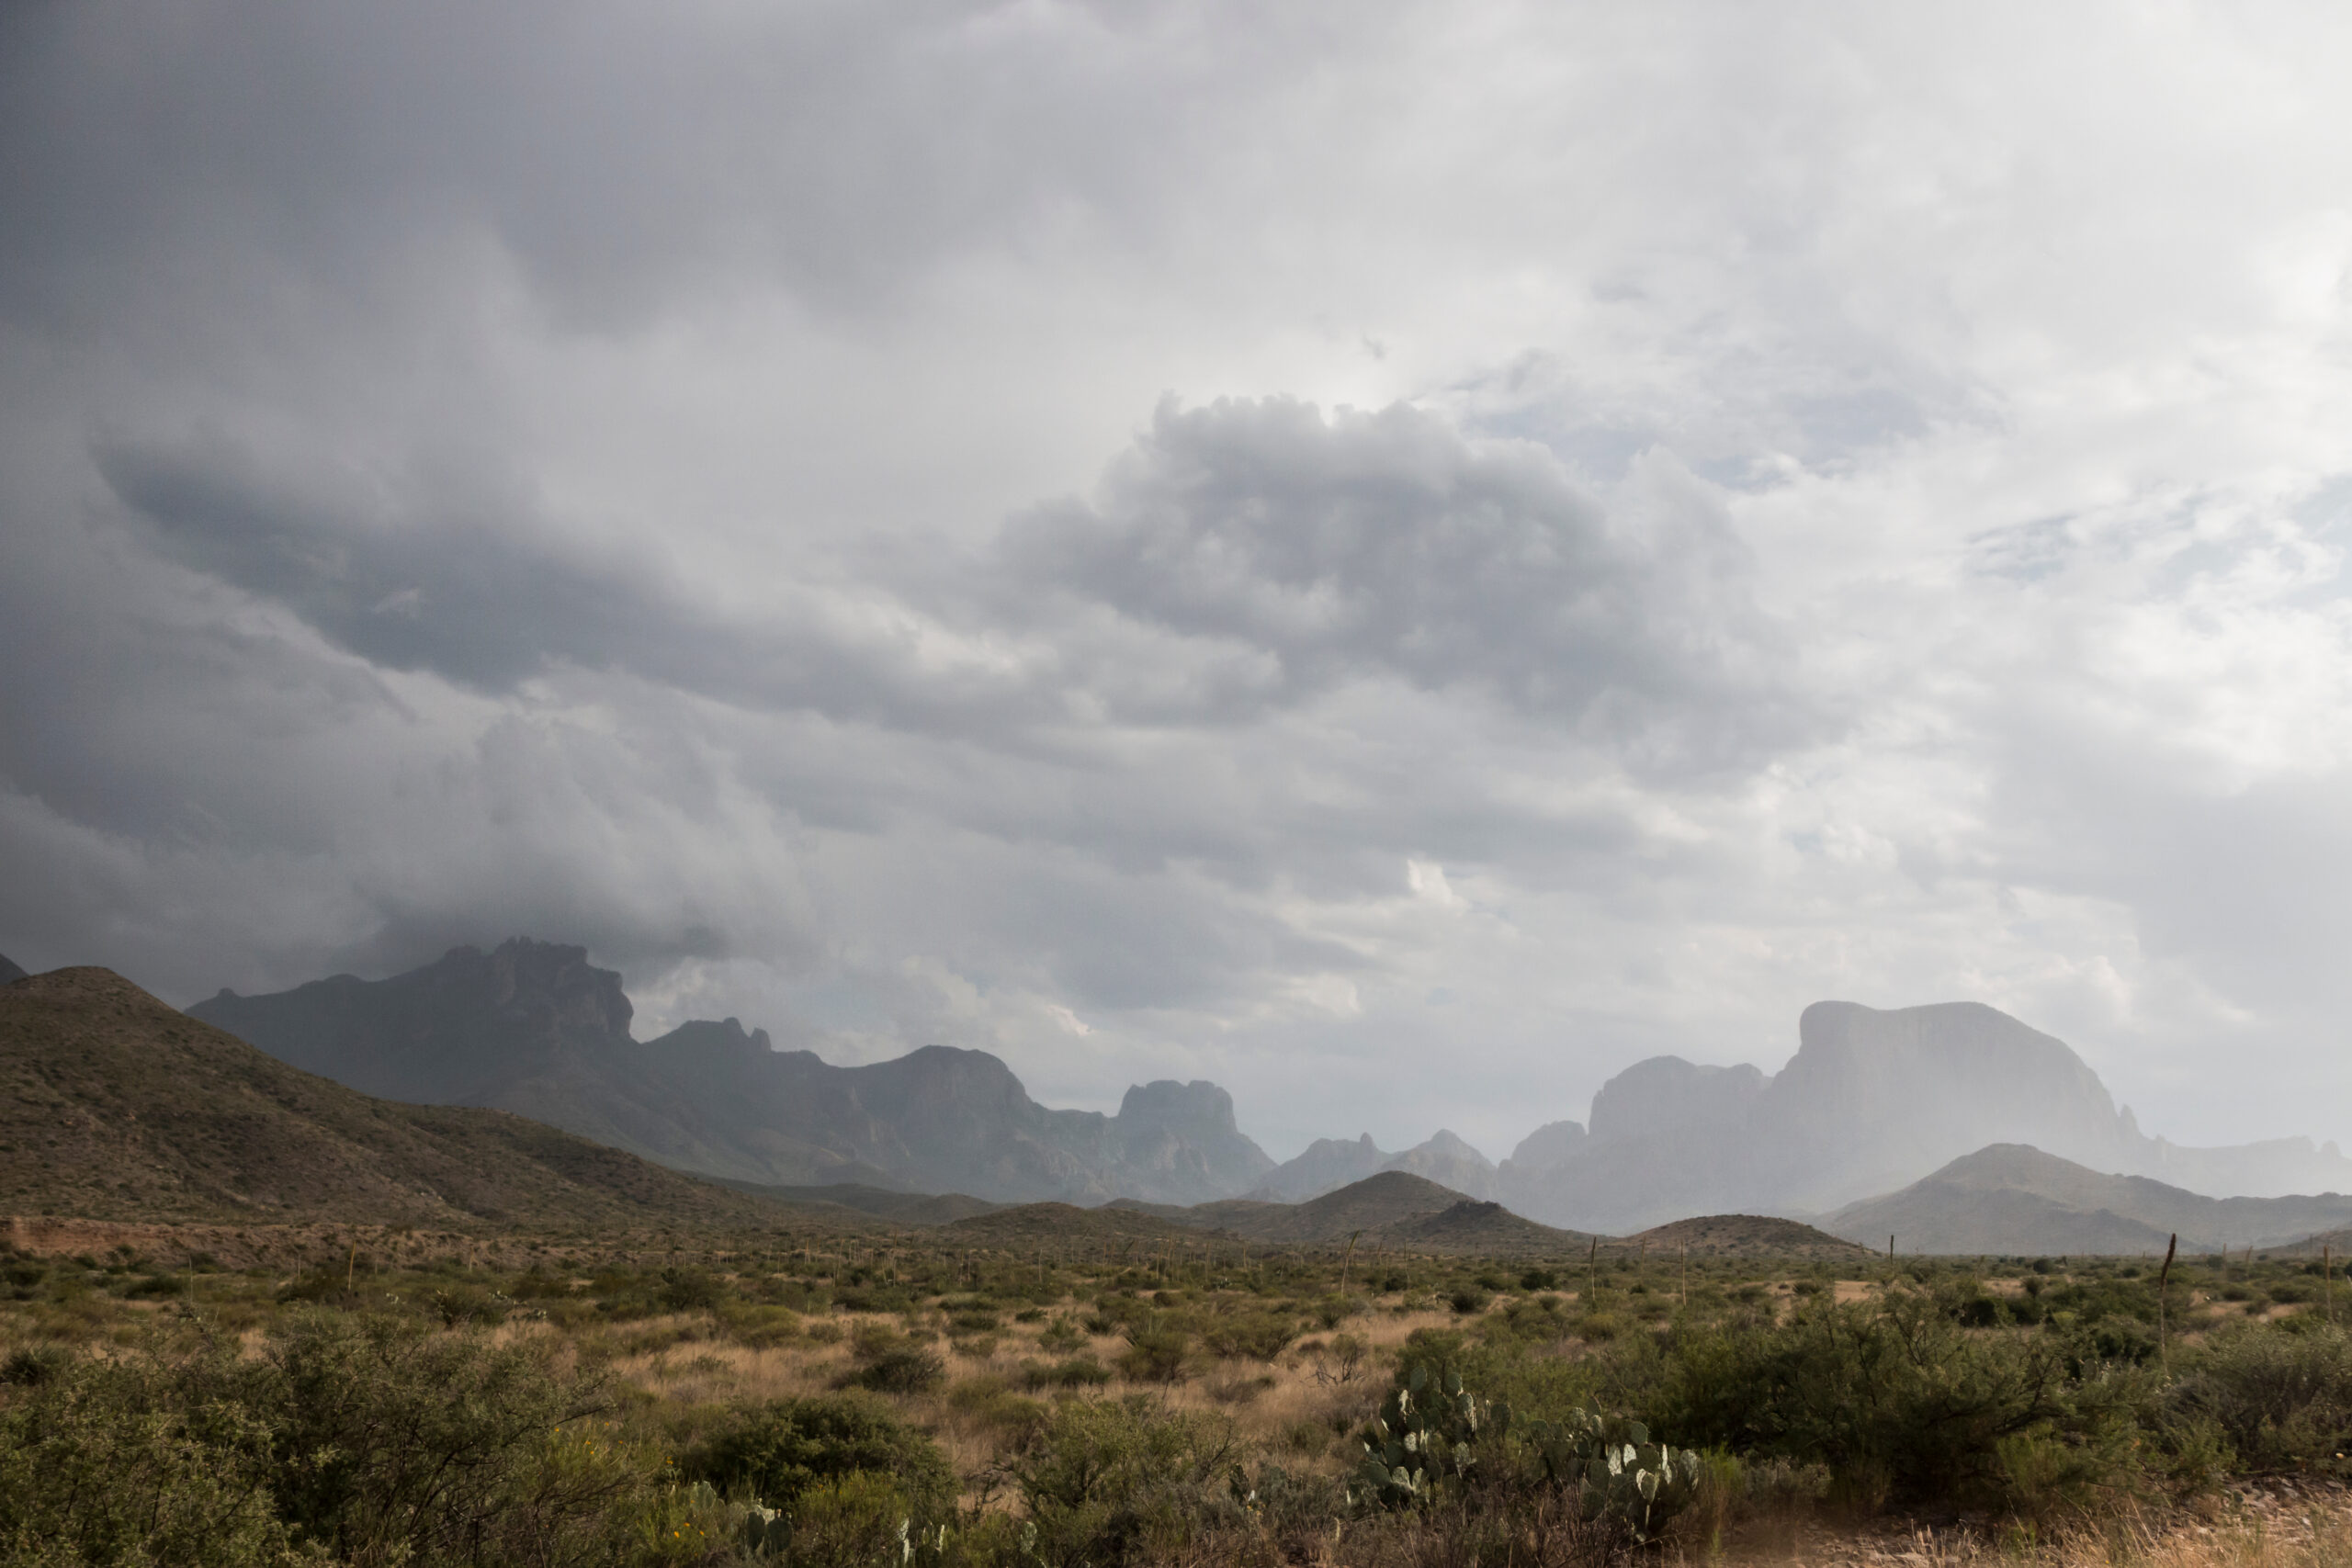 A thunderstorm rolls through the expansive skies above Big Bend National Park in Texas.